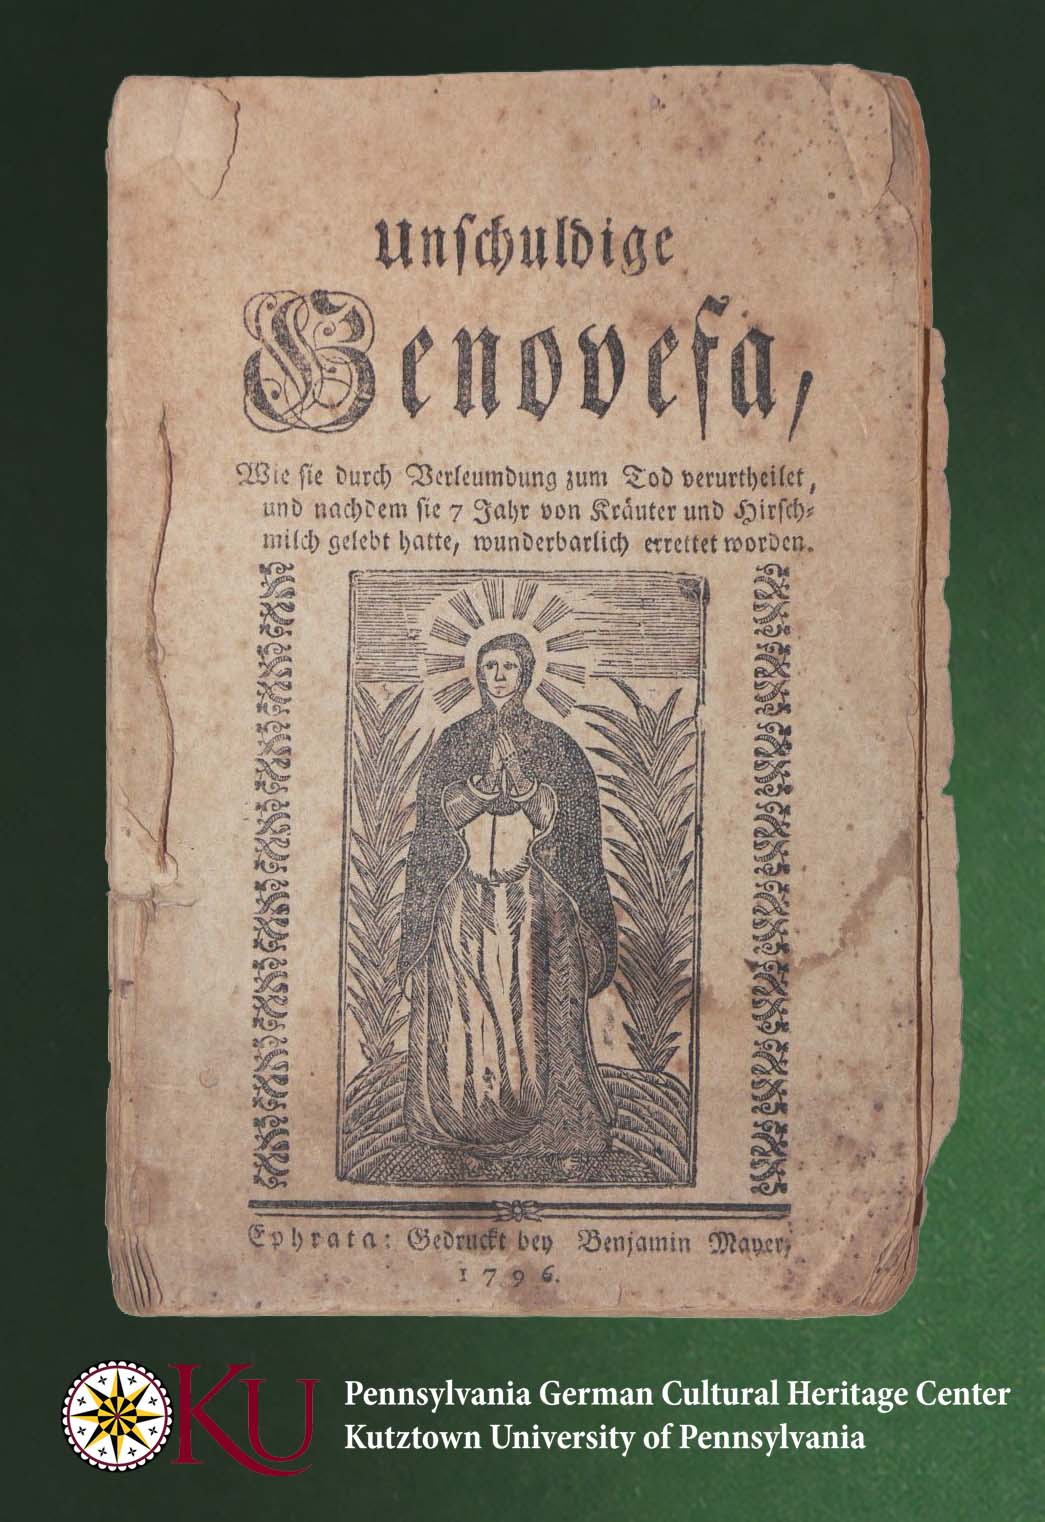 Early chapbook with woodcut of St. Genovefa of Brabant in the wilderness.